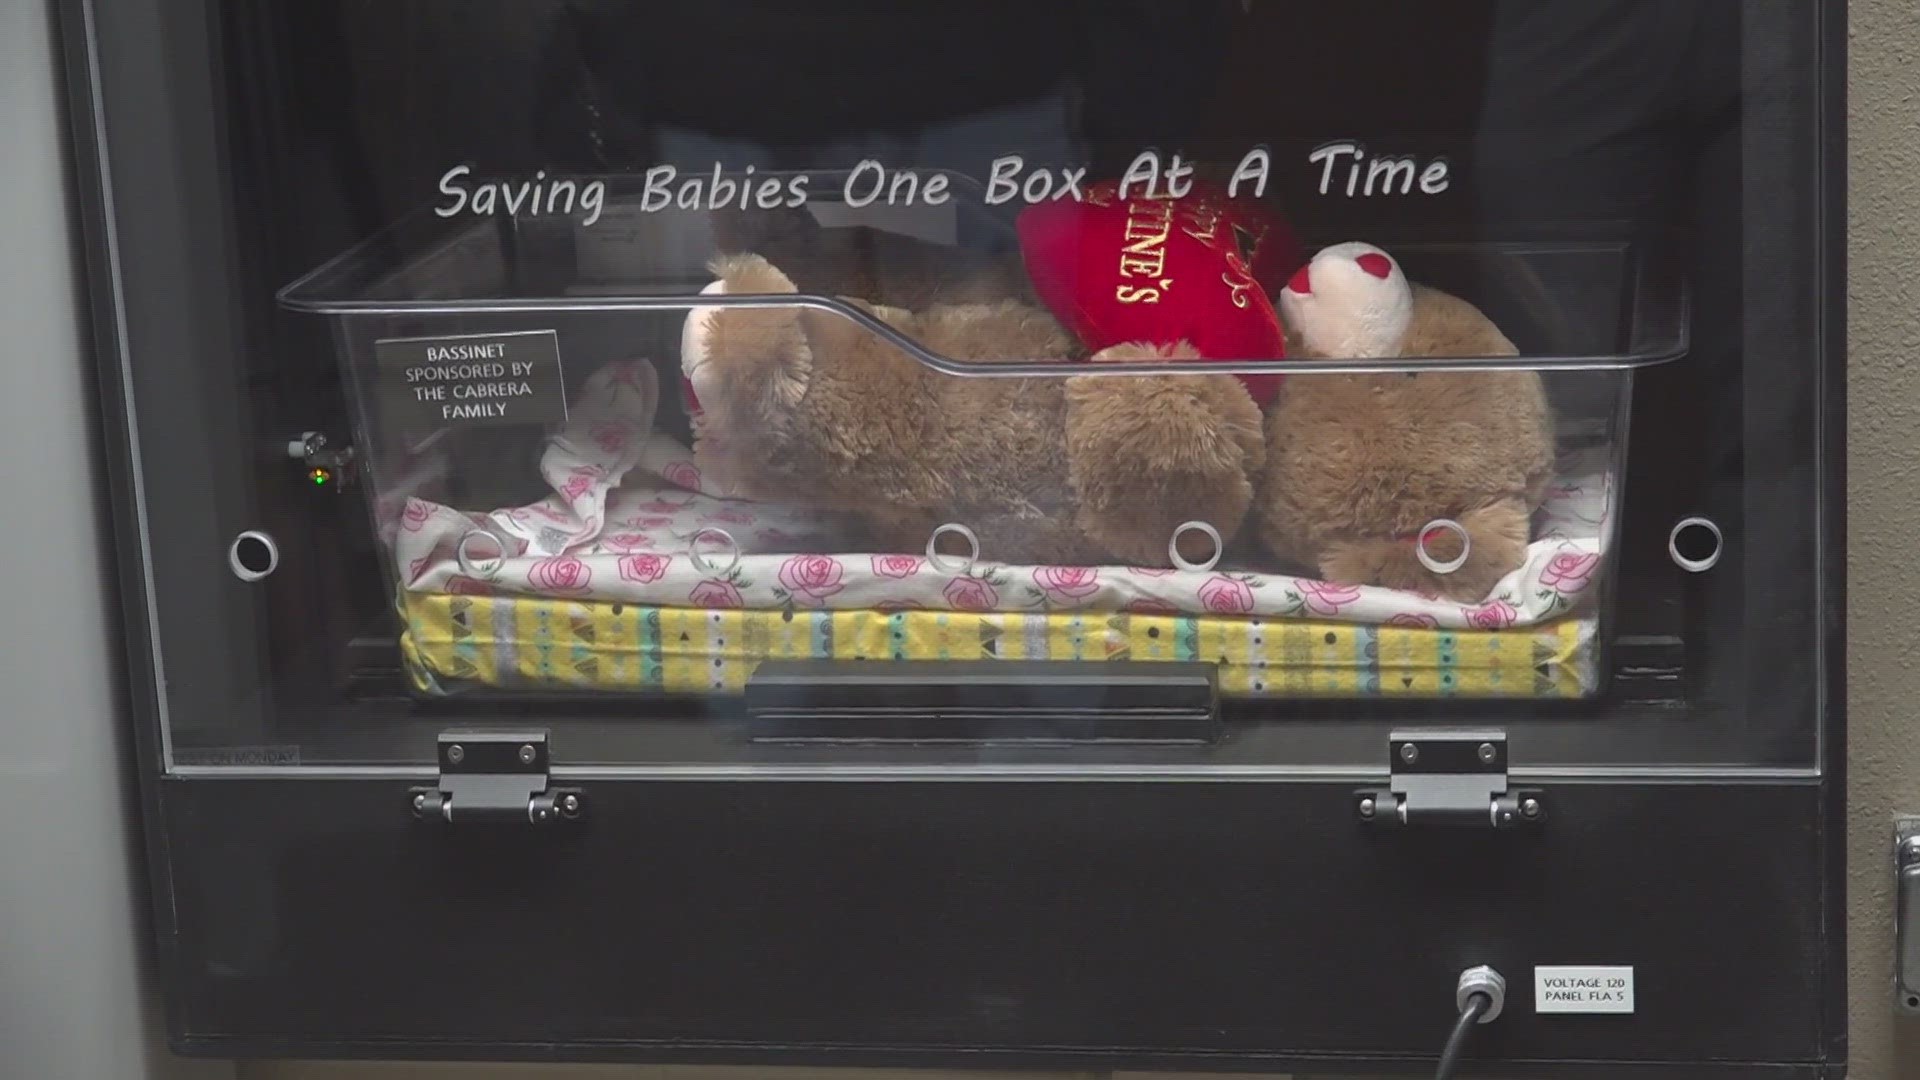 On Saturday, the baby box at Hobbs Central Fire Station was used for the first time. Interim Fire Chief Mark Doporto spoke on their response and how the box works.